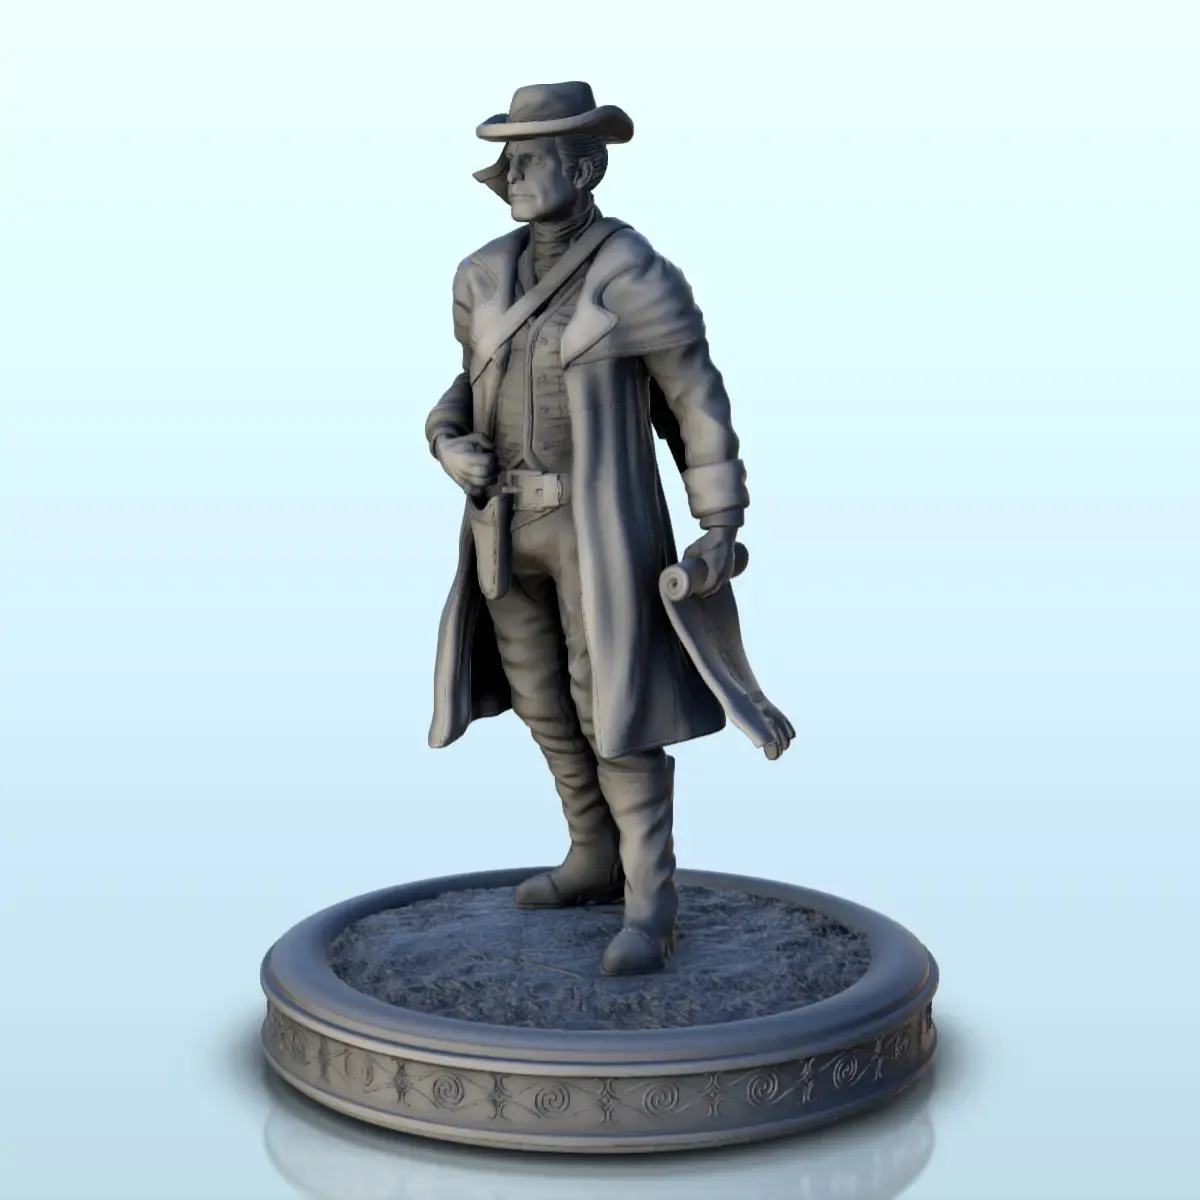 Bounty hunter with wanted notice (12) - Old West Figure mini